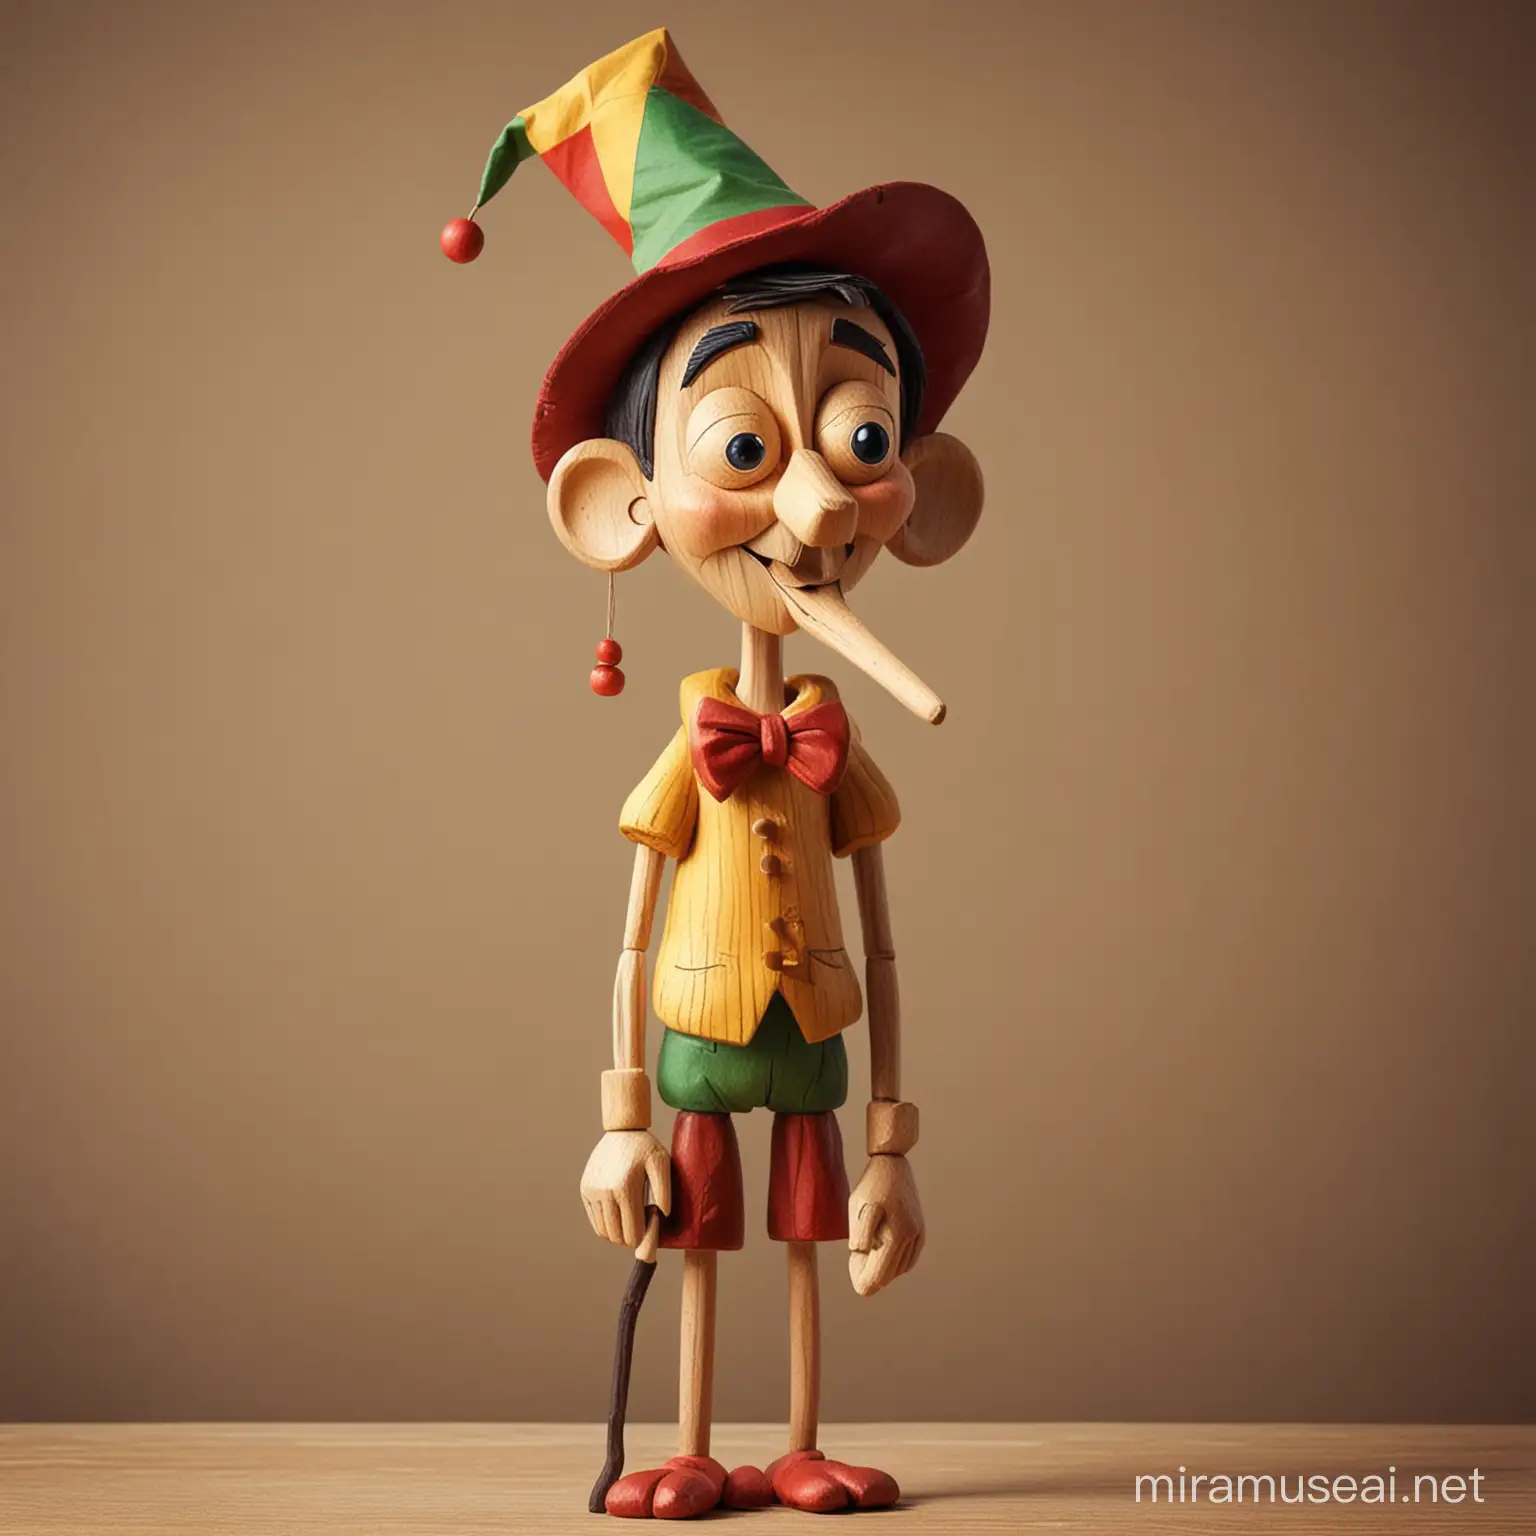 pinocchio, wooden puppet art style, with really long nose